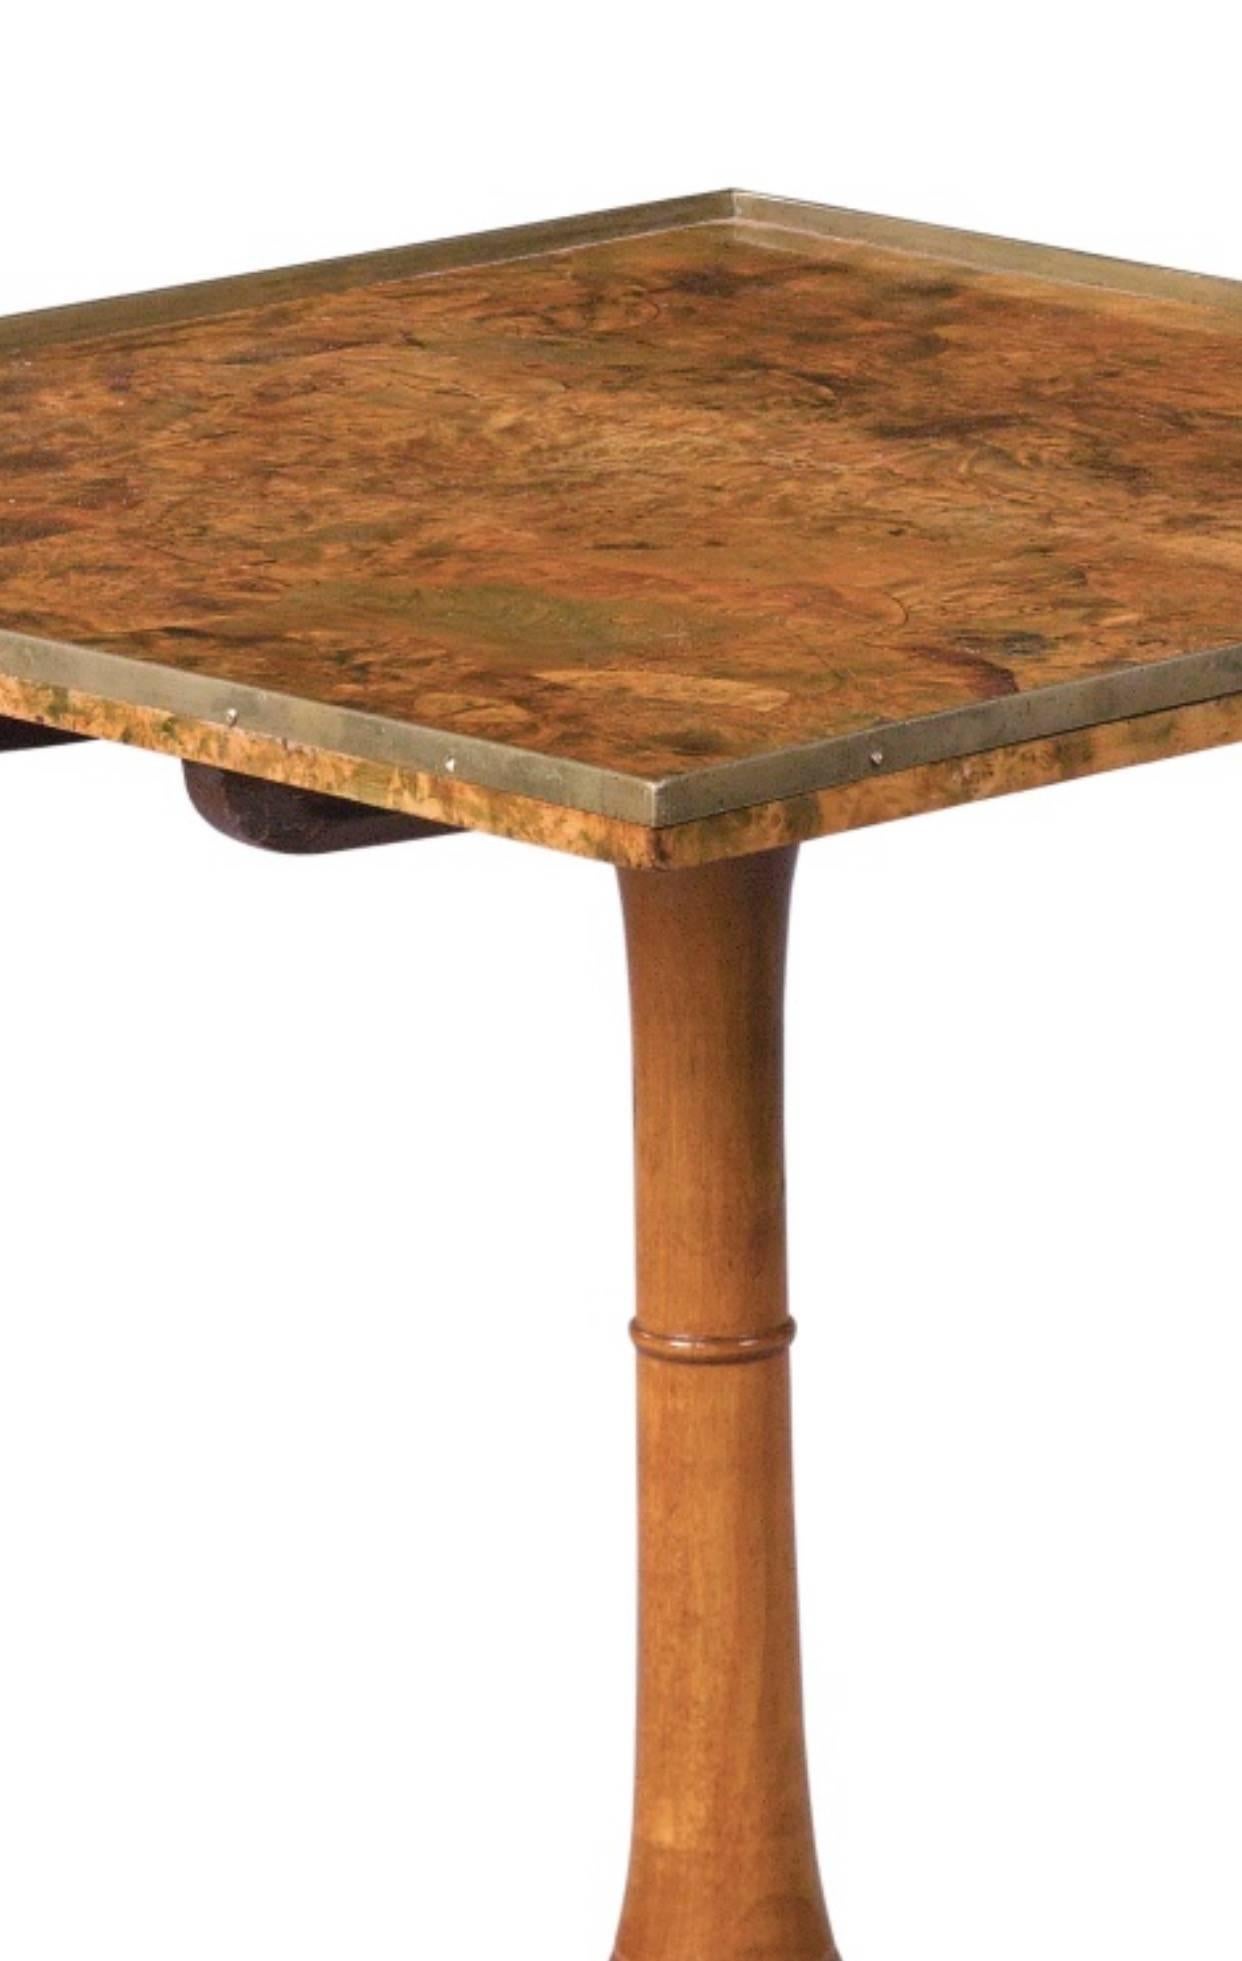 Swedish Burl Walnut Tilt-Top Table, Late 18th Century In Good Condition For Sale In Spencertown, NY